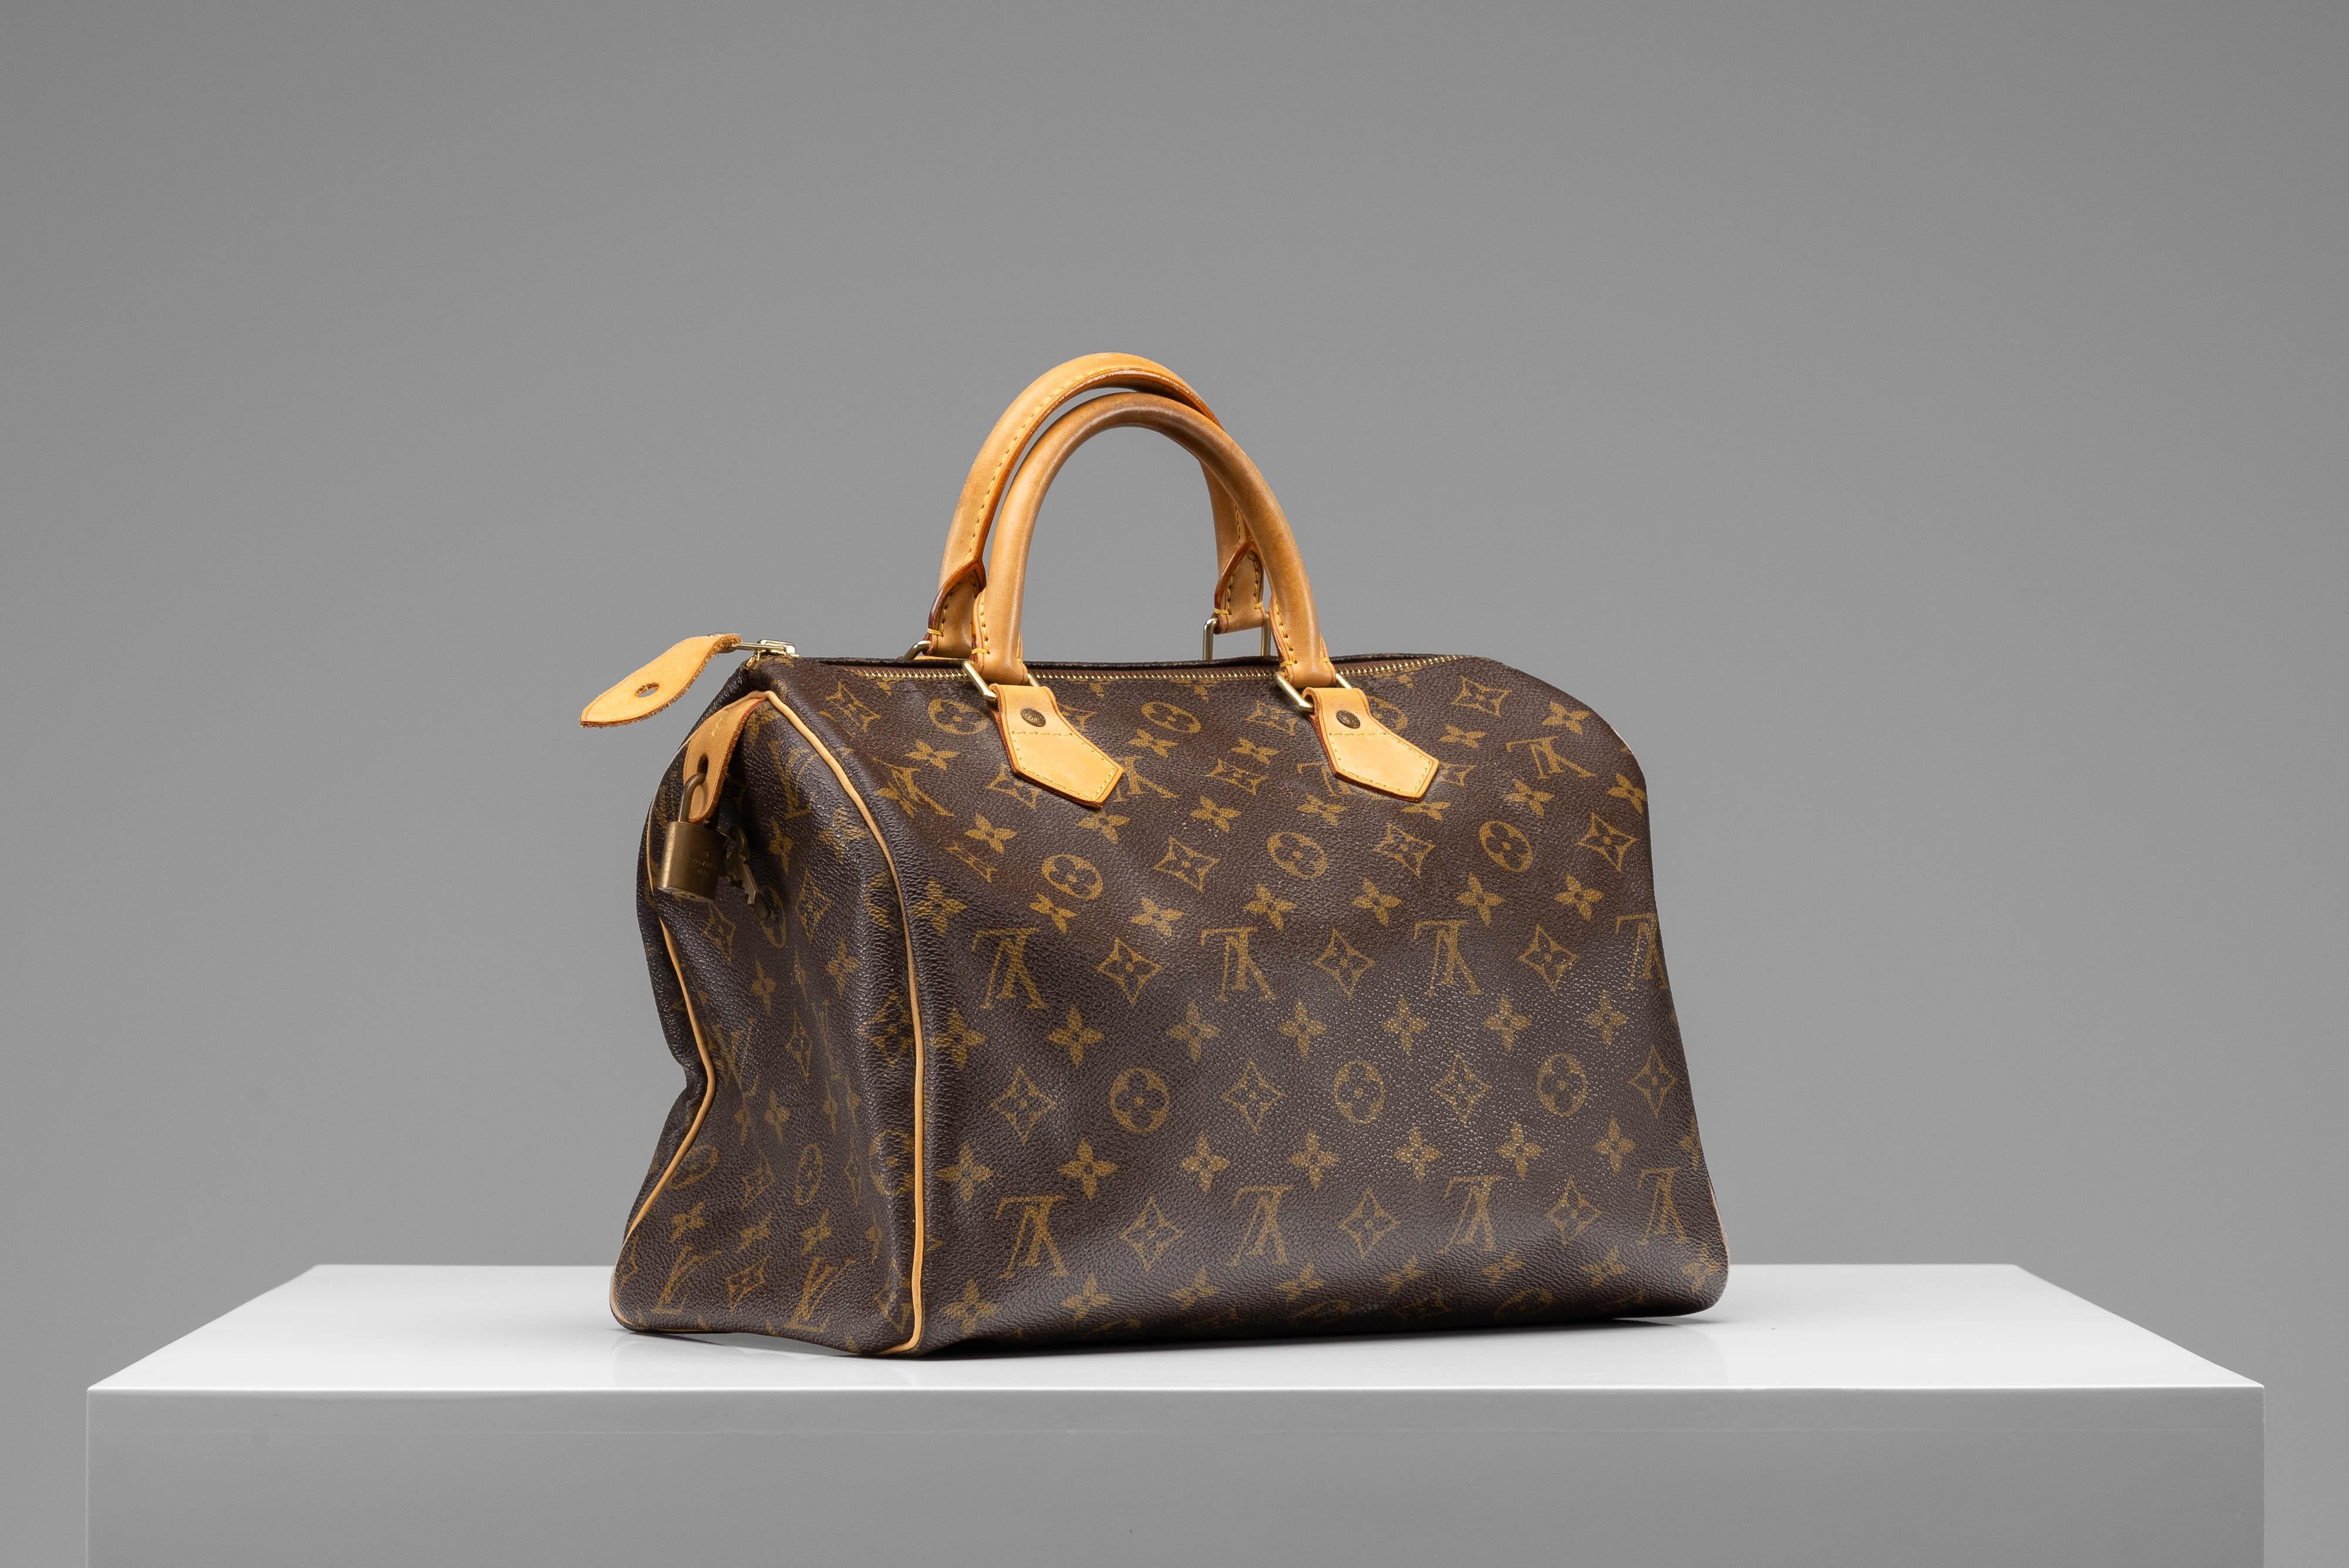 From the collection of SAVINETI we offer this Louis Vuitton Speedy 30:
-    Brand: Louis Vuitton
-    Model: Speedy 30
-    Condition: Very Good Condition (on small spot inside the bag - see image) 
-    Materials: Monogram Leather, gold-color